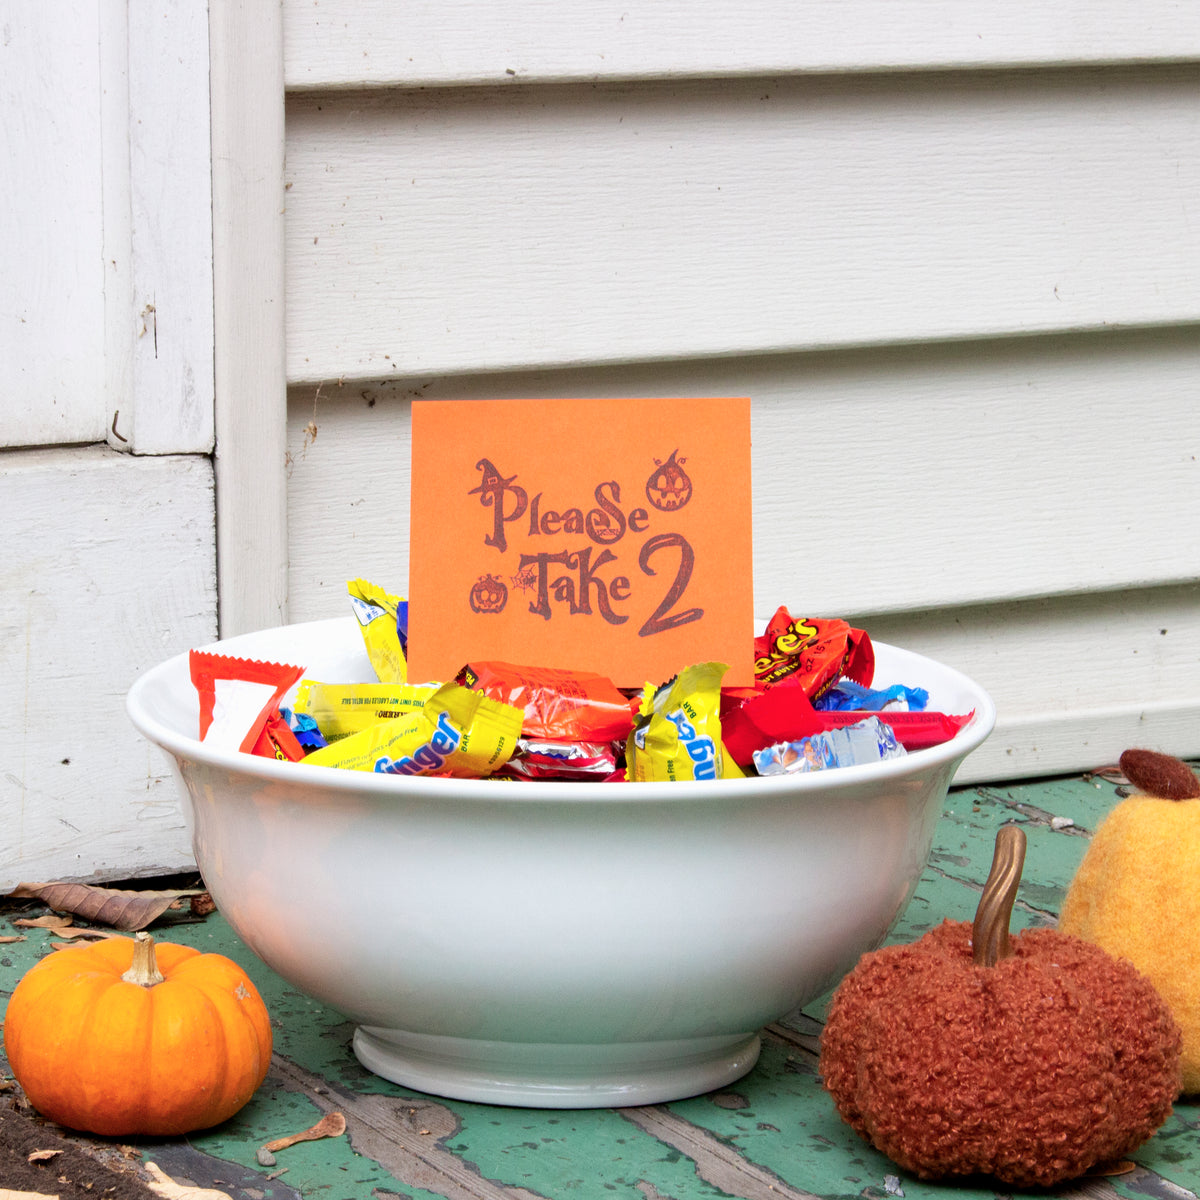 13 Clever Ways to Display Your Halloween Candy for Trick-or-Treaters